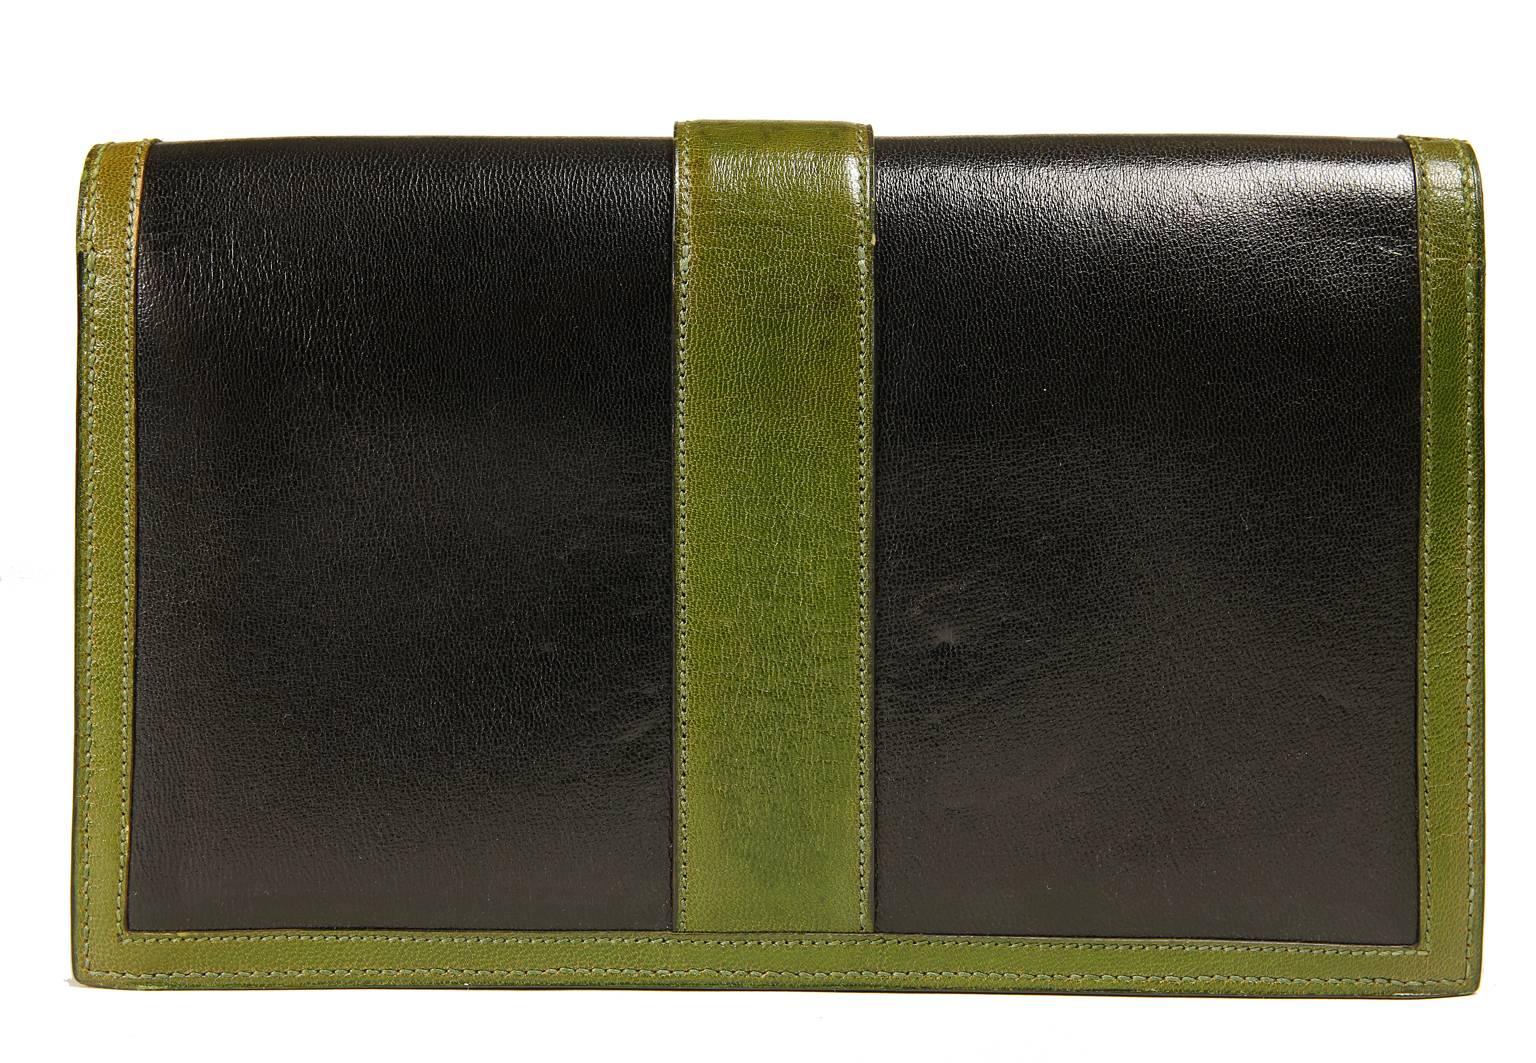 Hermès Black and Green Leather Clutch- Excellent Plus condition
  The very unique style is rarely seen and quite collectible.
 
Black leather clutch is trimmed with dark green and resembles the Jige clutch in silhouette and closure.  Two gold